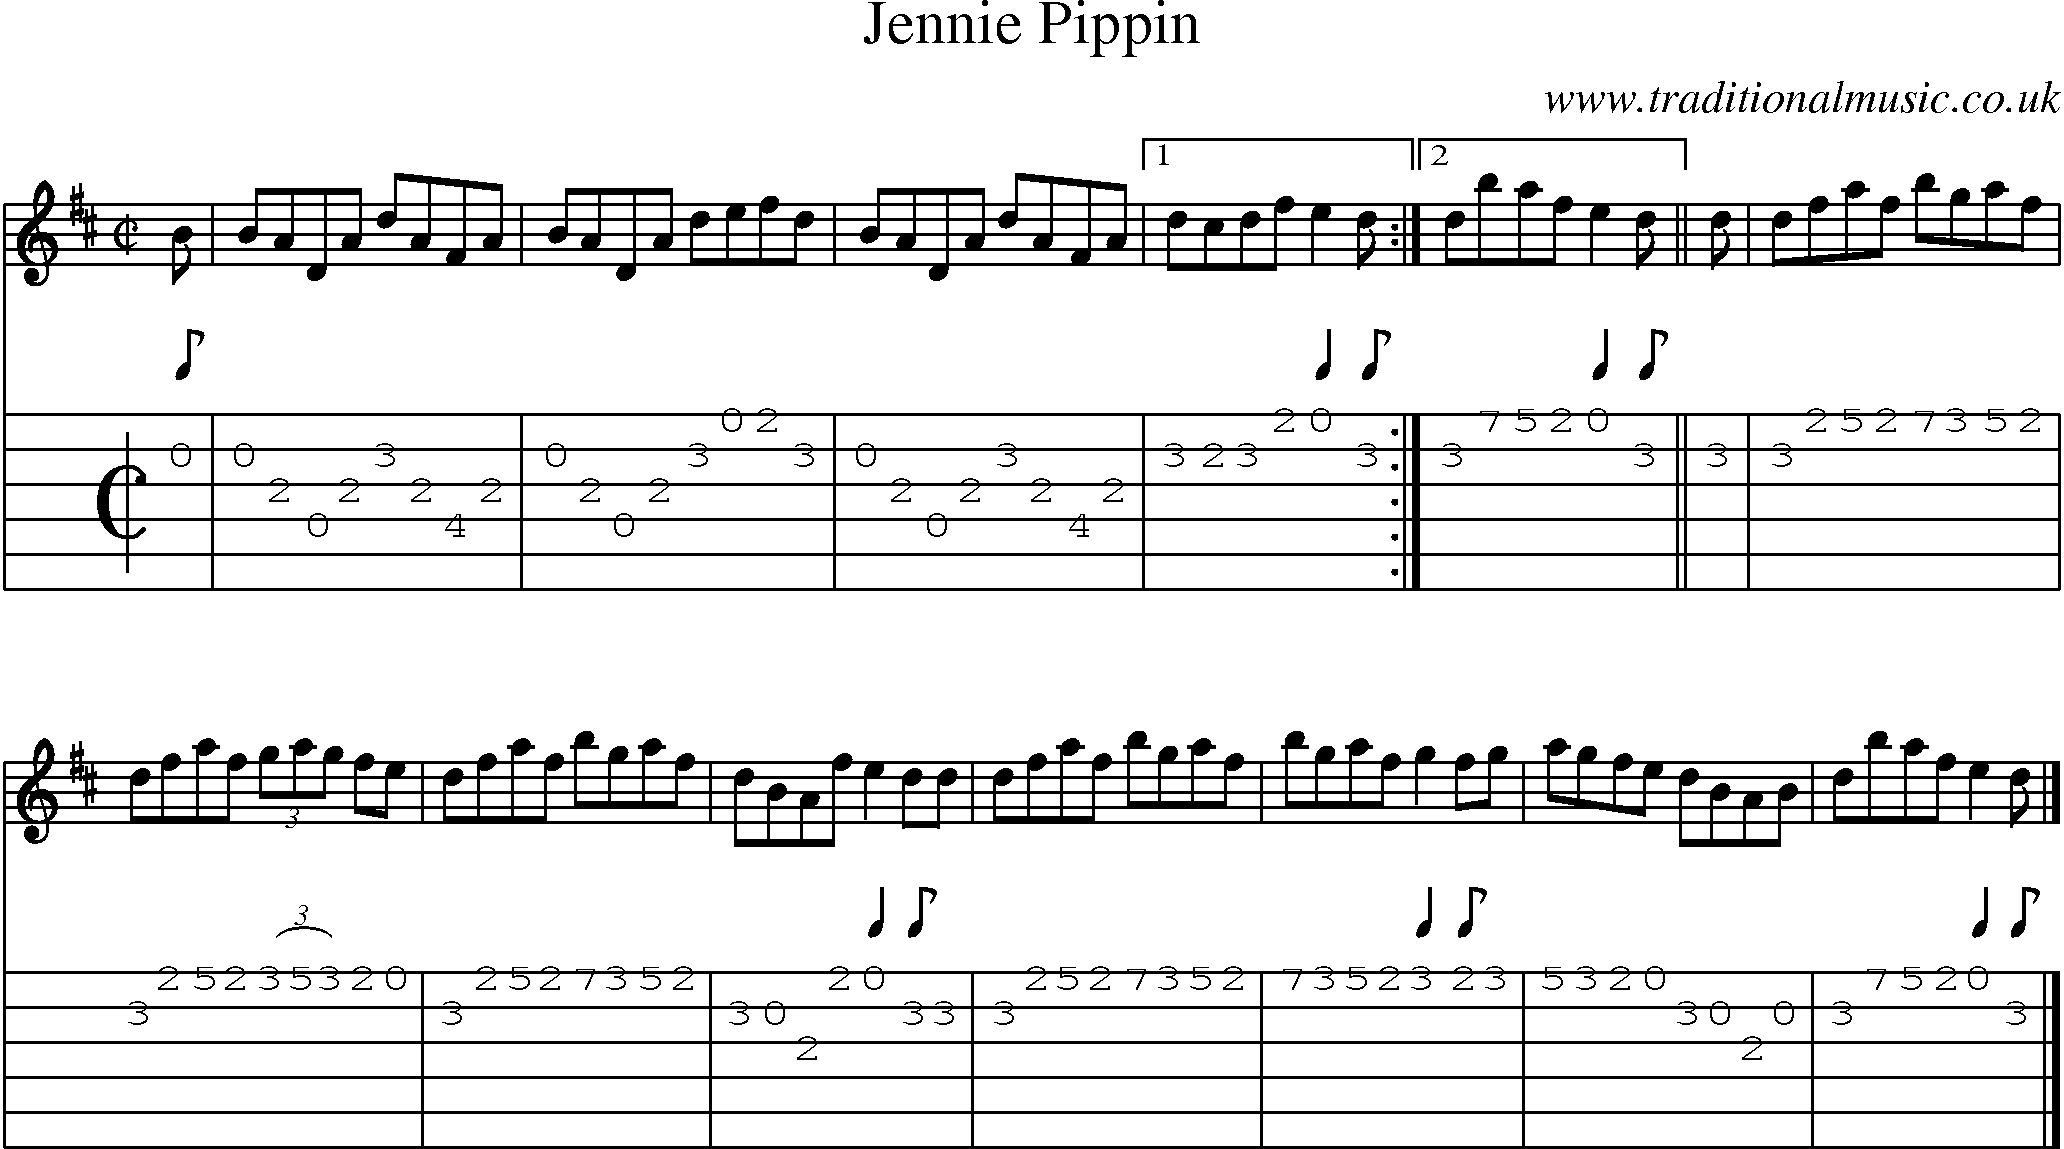 Music Score and Guitar Tabs for Jennie Pippin